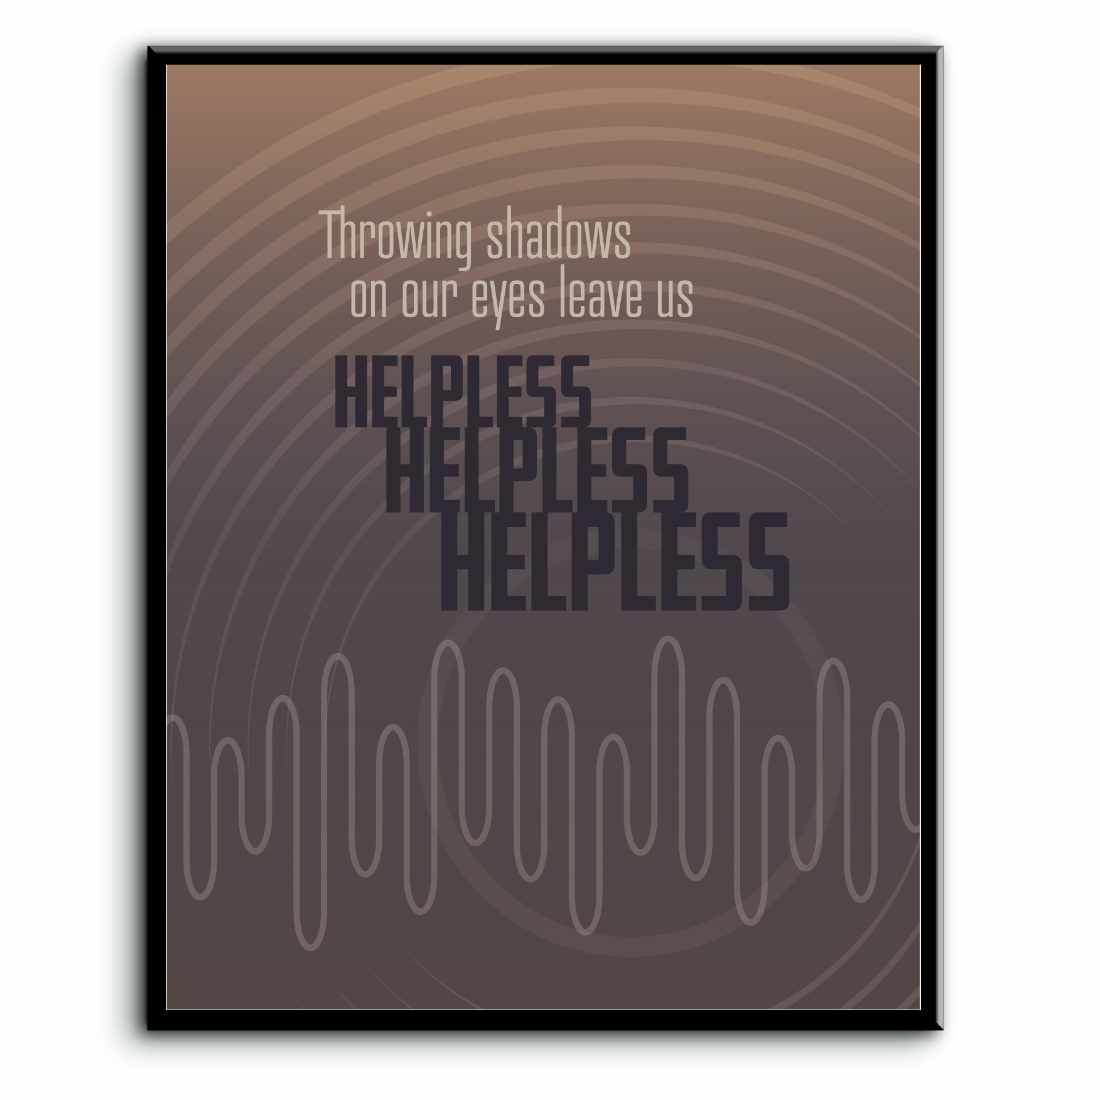 Helpless by Neil Young - Music Gift Song Lyric Wall Decor Song Lyrics Art Song Lyrics Art 8x10 Plaque Mount 